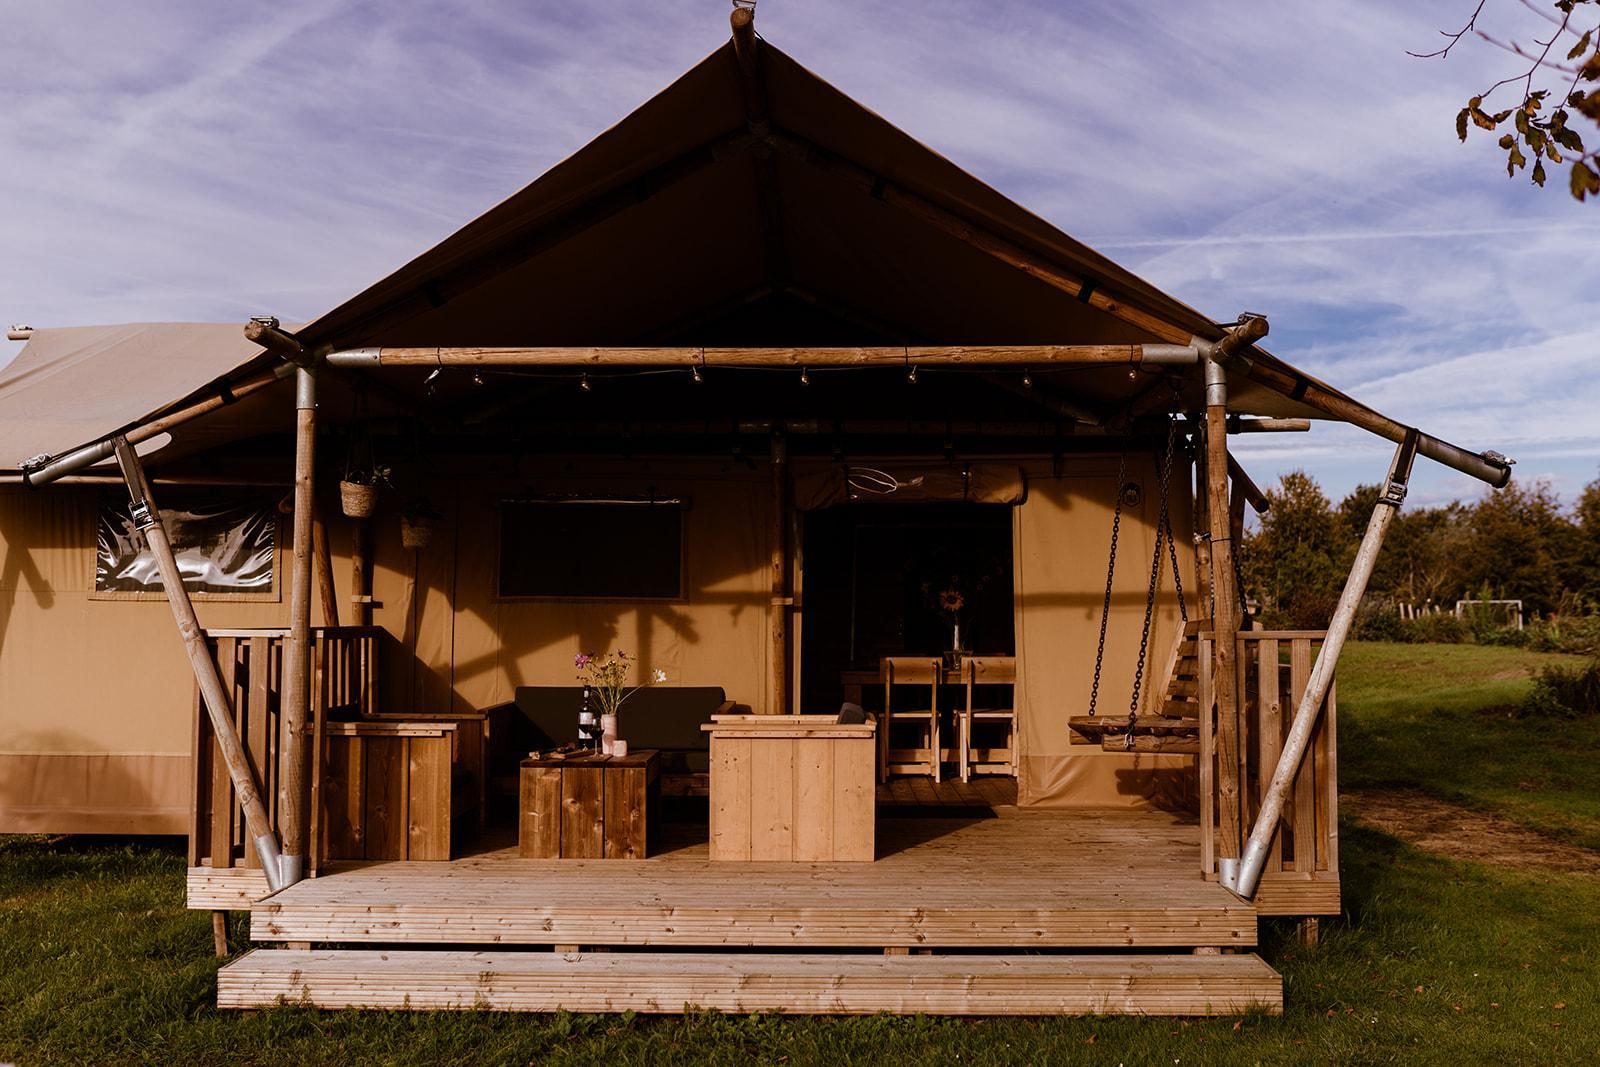 Groupaccommodation 'de Blokhut' + 4 5-person glamping tents (20 people)